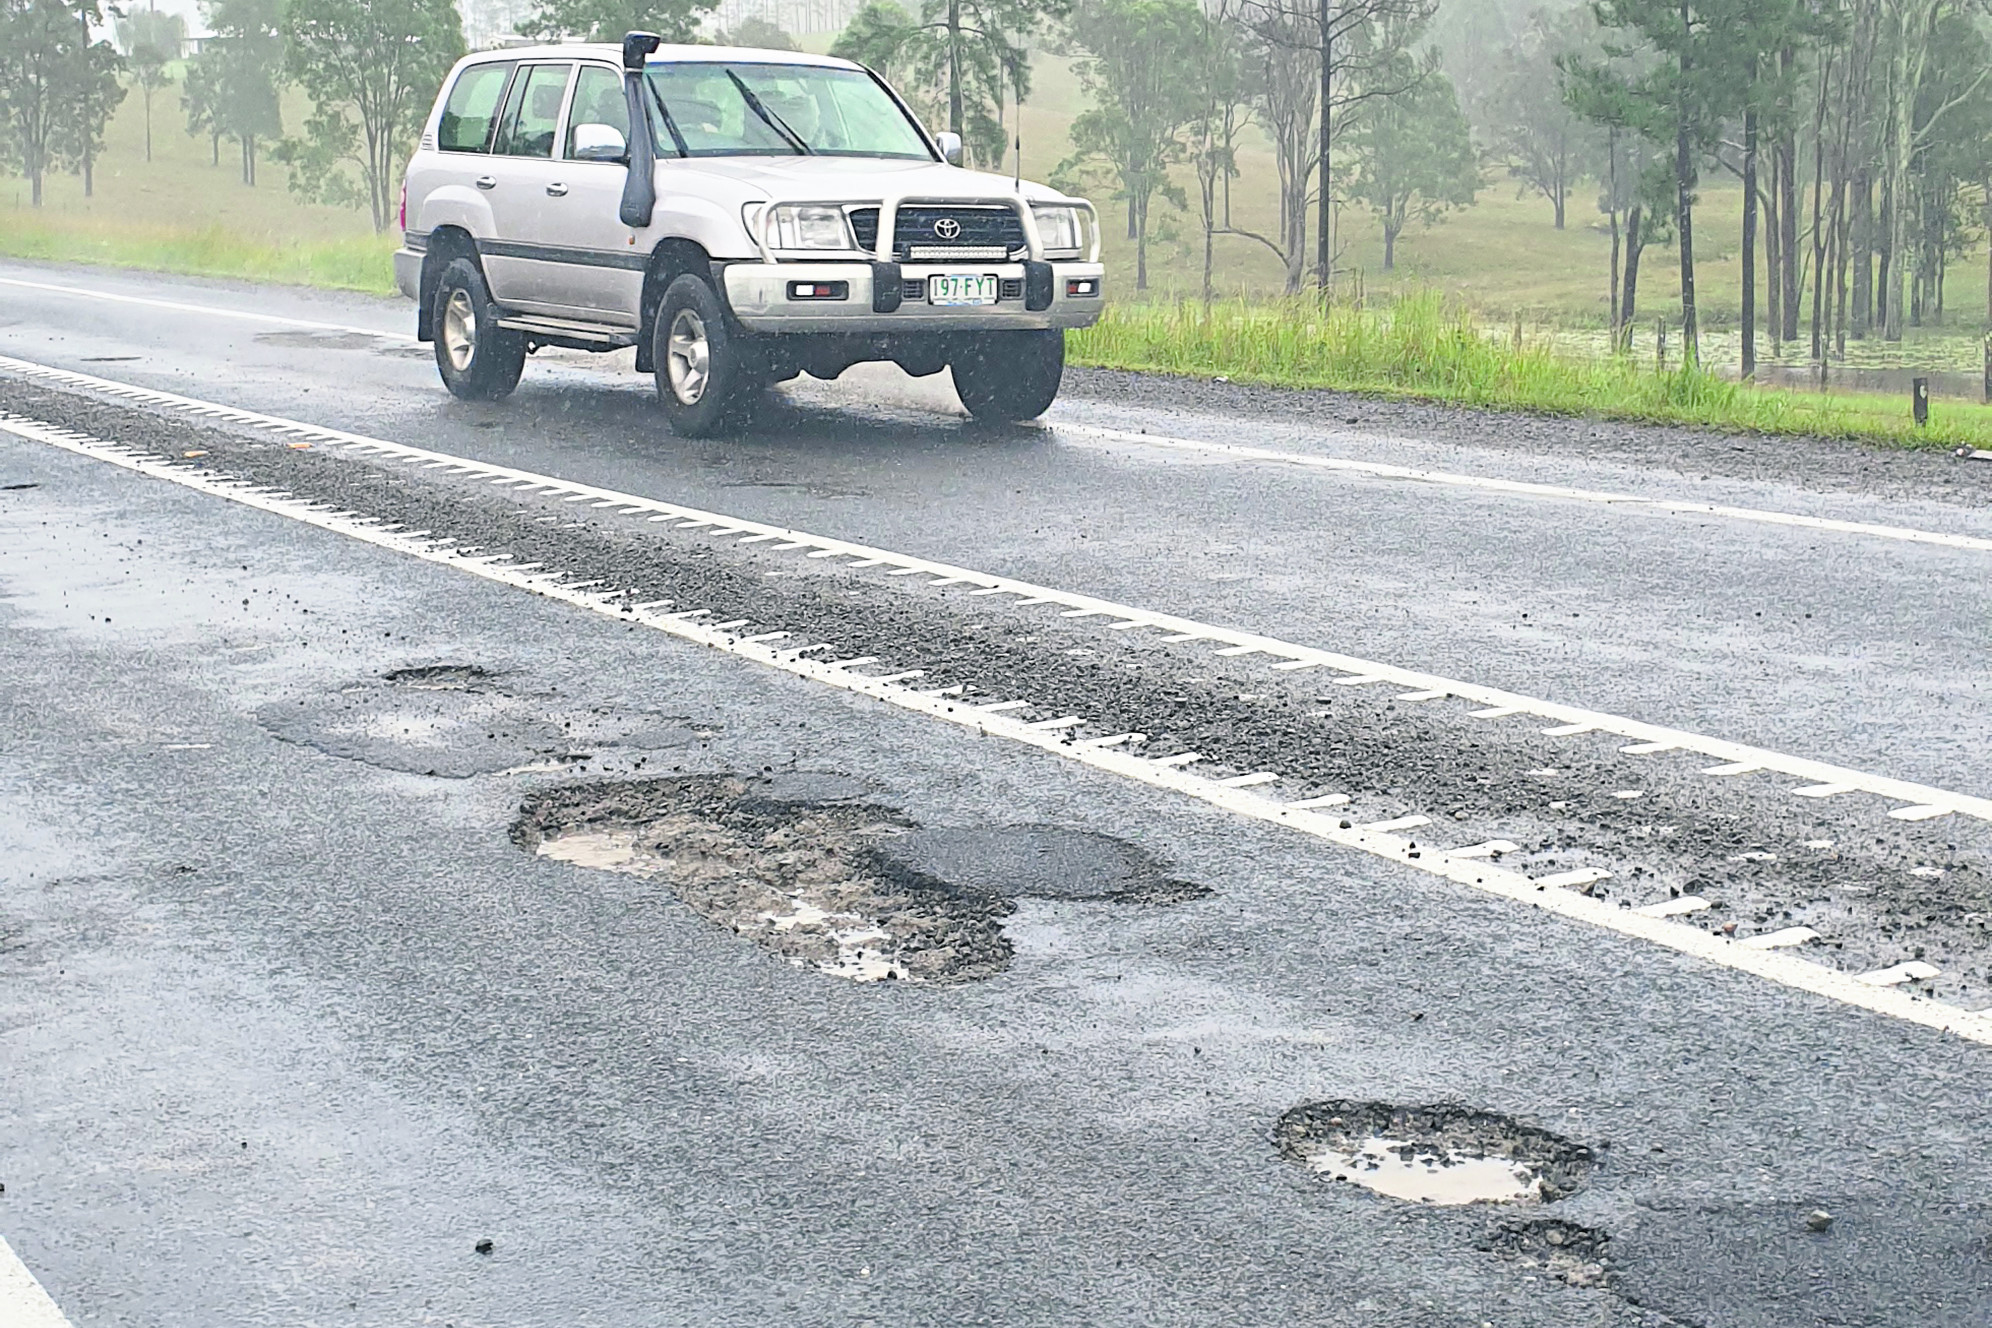 Potholes on the D’Aguilar Highway on Tuesday morning (6 April, 2021) near the Jenkinsons Road intersection (approximately 5km west of Woodford)